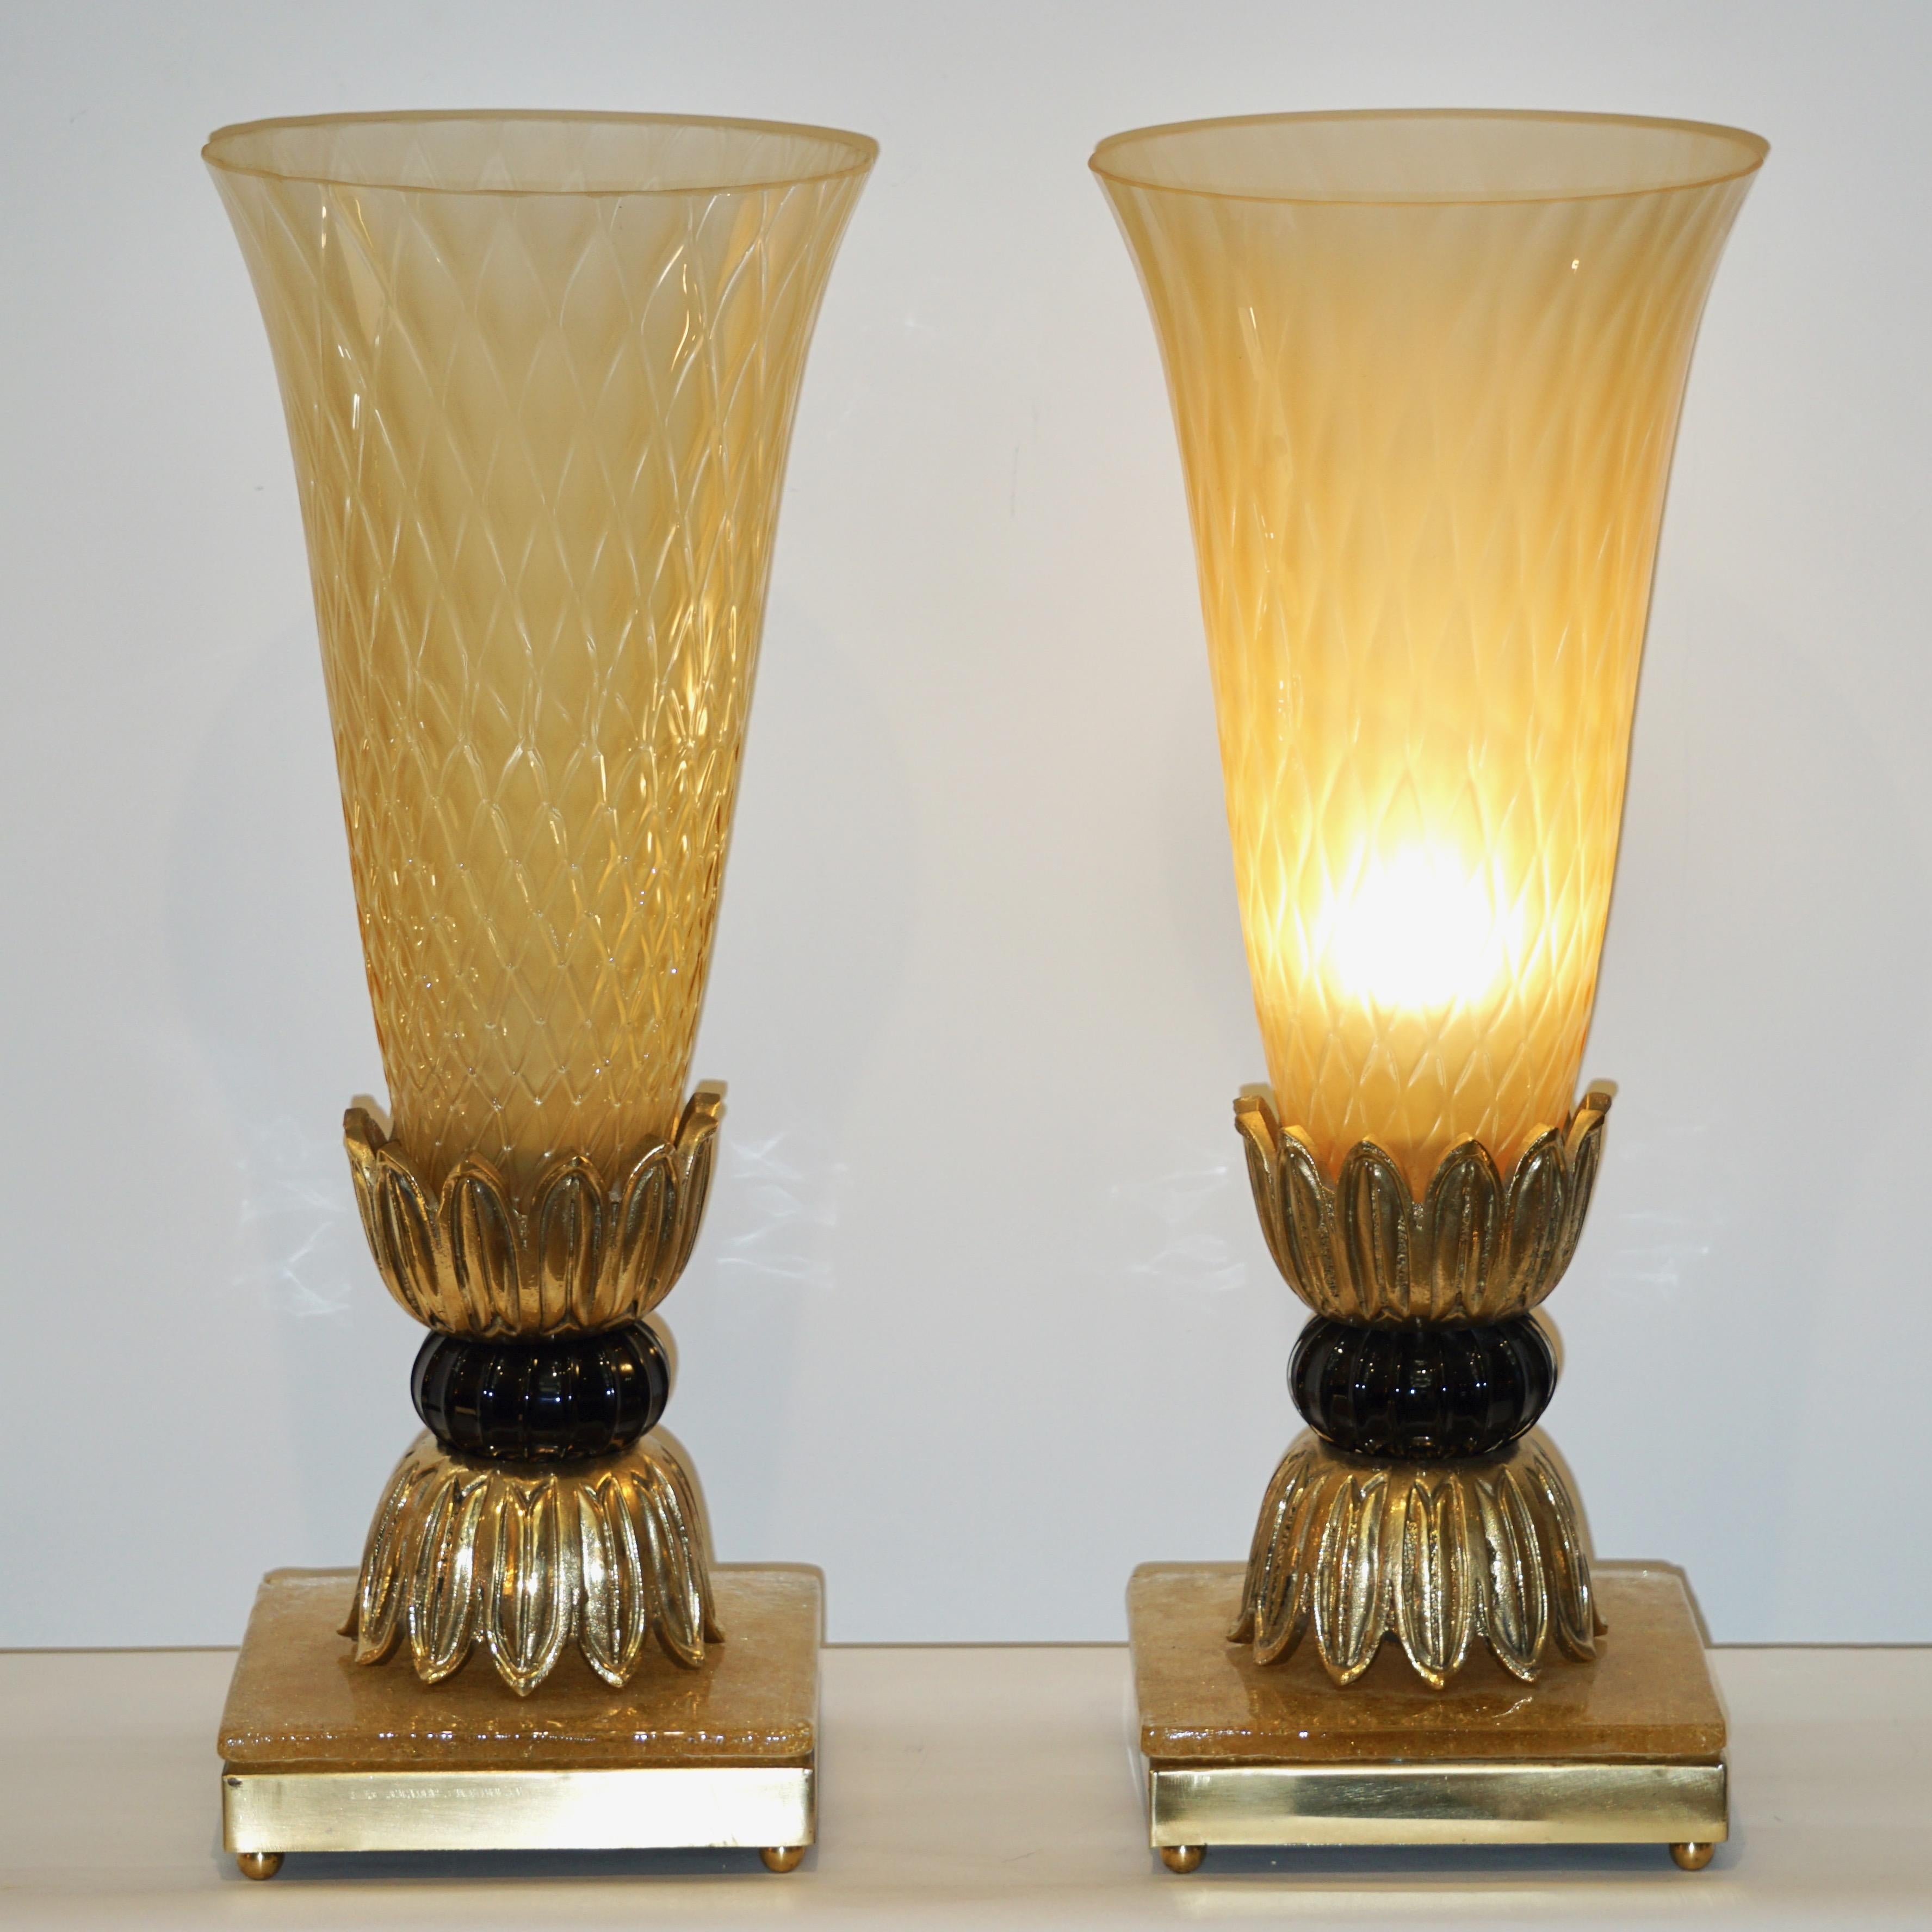 Barovier Toso Art Deco Style Pair of Brass and Gold Honeycomb Murano Glass Lamps 2